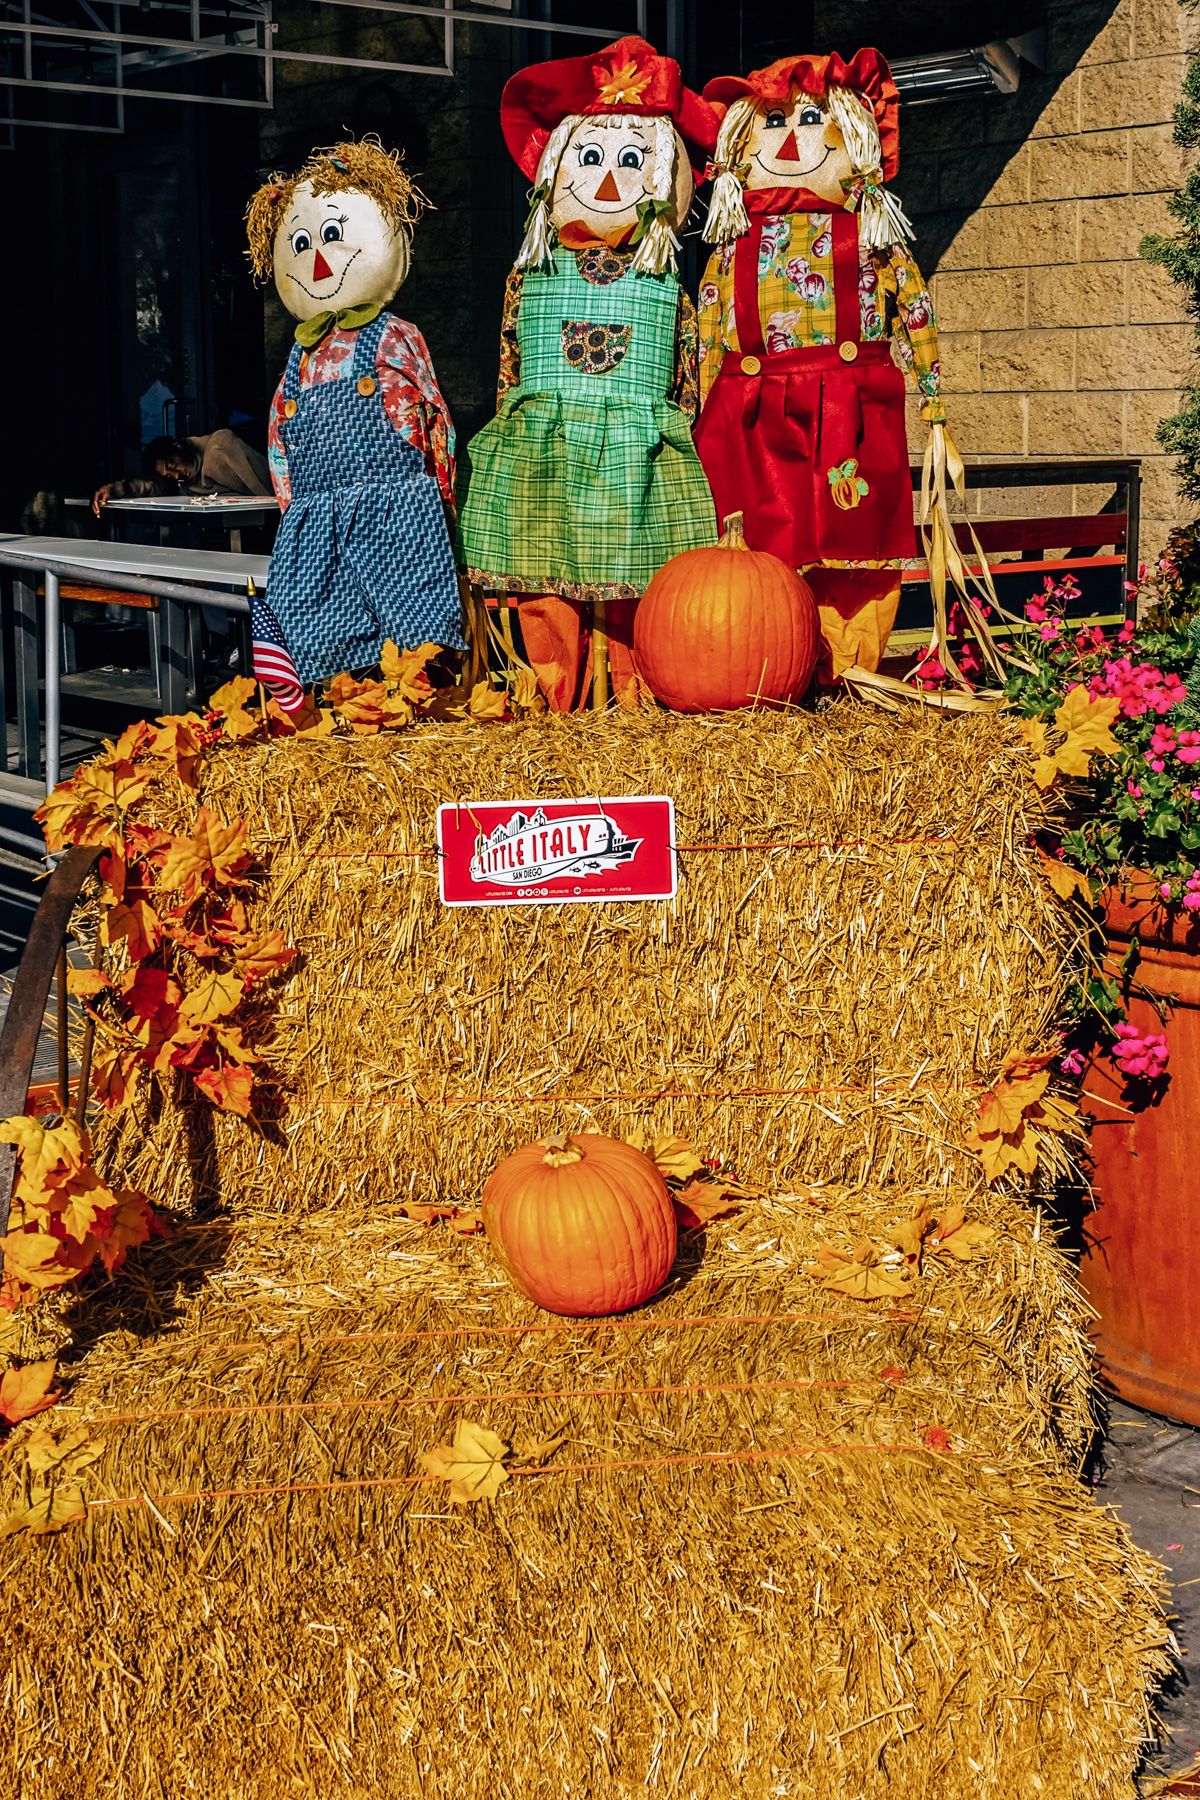 Best Pumpkin Patches in San Diego: three cloth scarecrows and several pumpkins perched on top of a stack of hay bales that display a small sign reading "Little Italy San Diego."